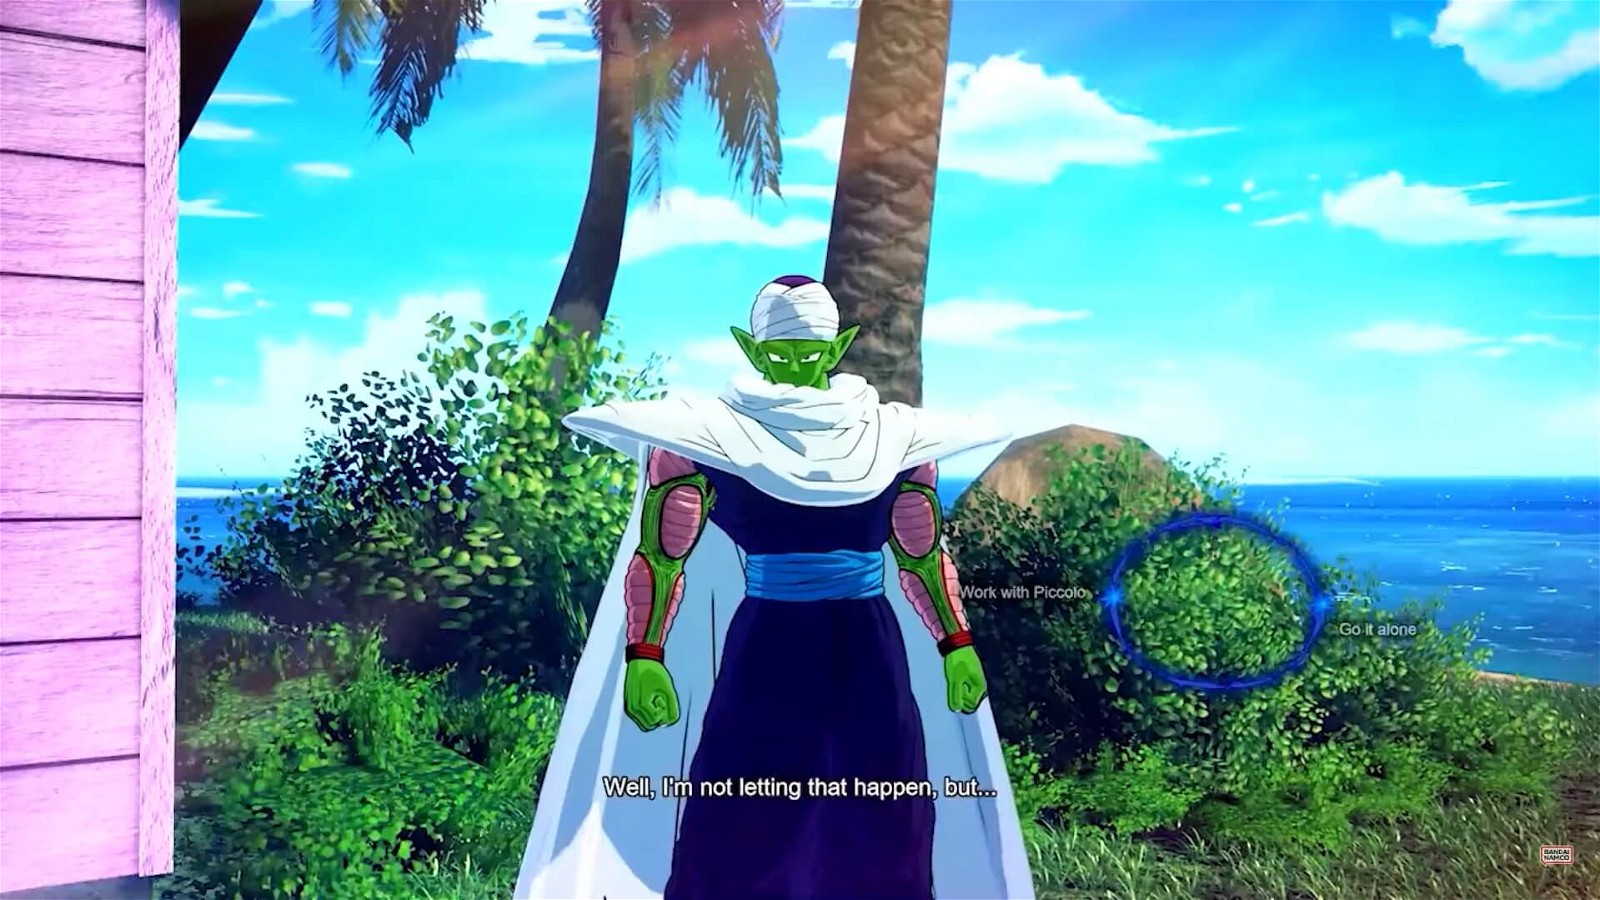 Goku is about to choose whether to work with Piccolo of not. Credits: Bandai Namco